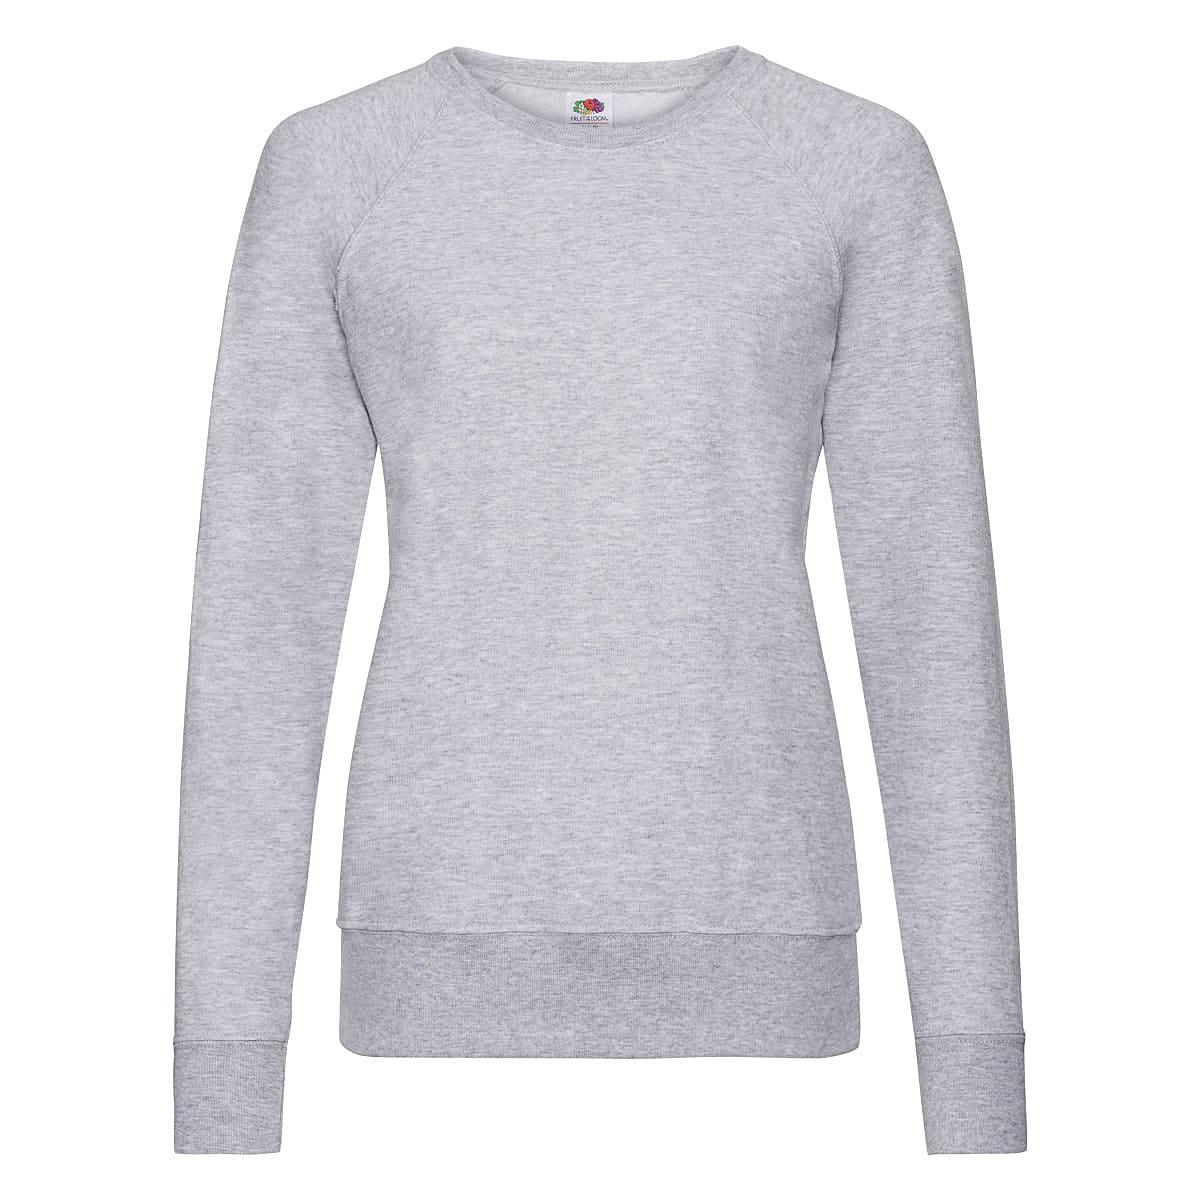 Fruit Of The Loom Lady-Fit Lightweight Raglan Sweater in Heather Grey (Product Code: 62146)